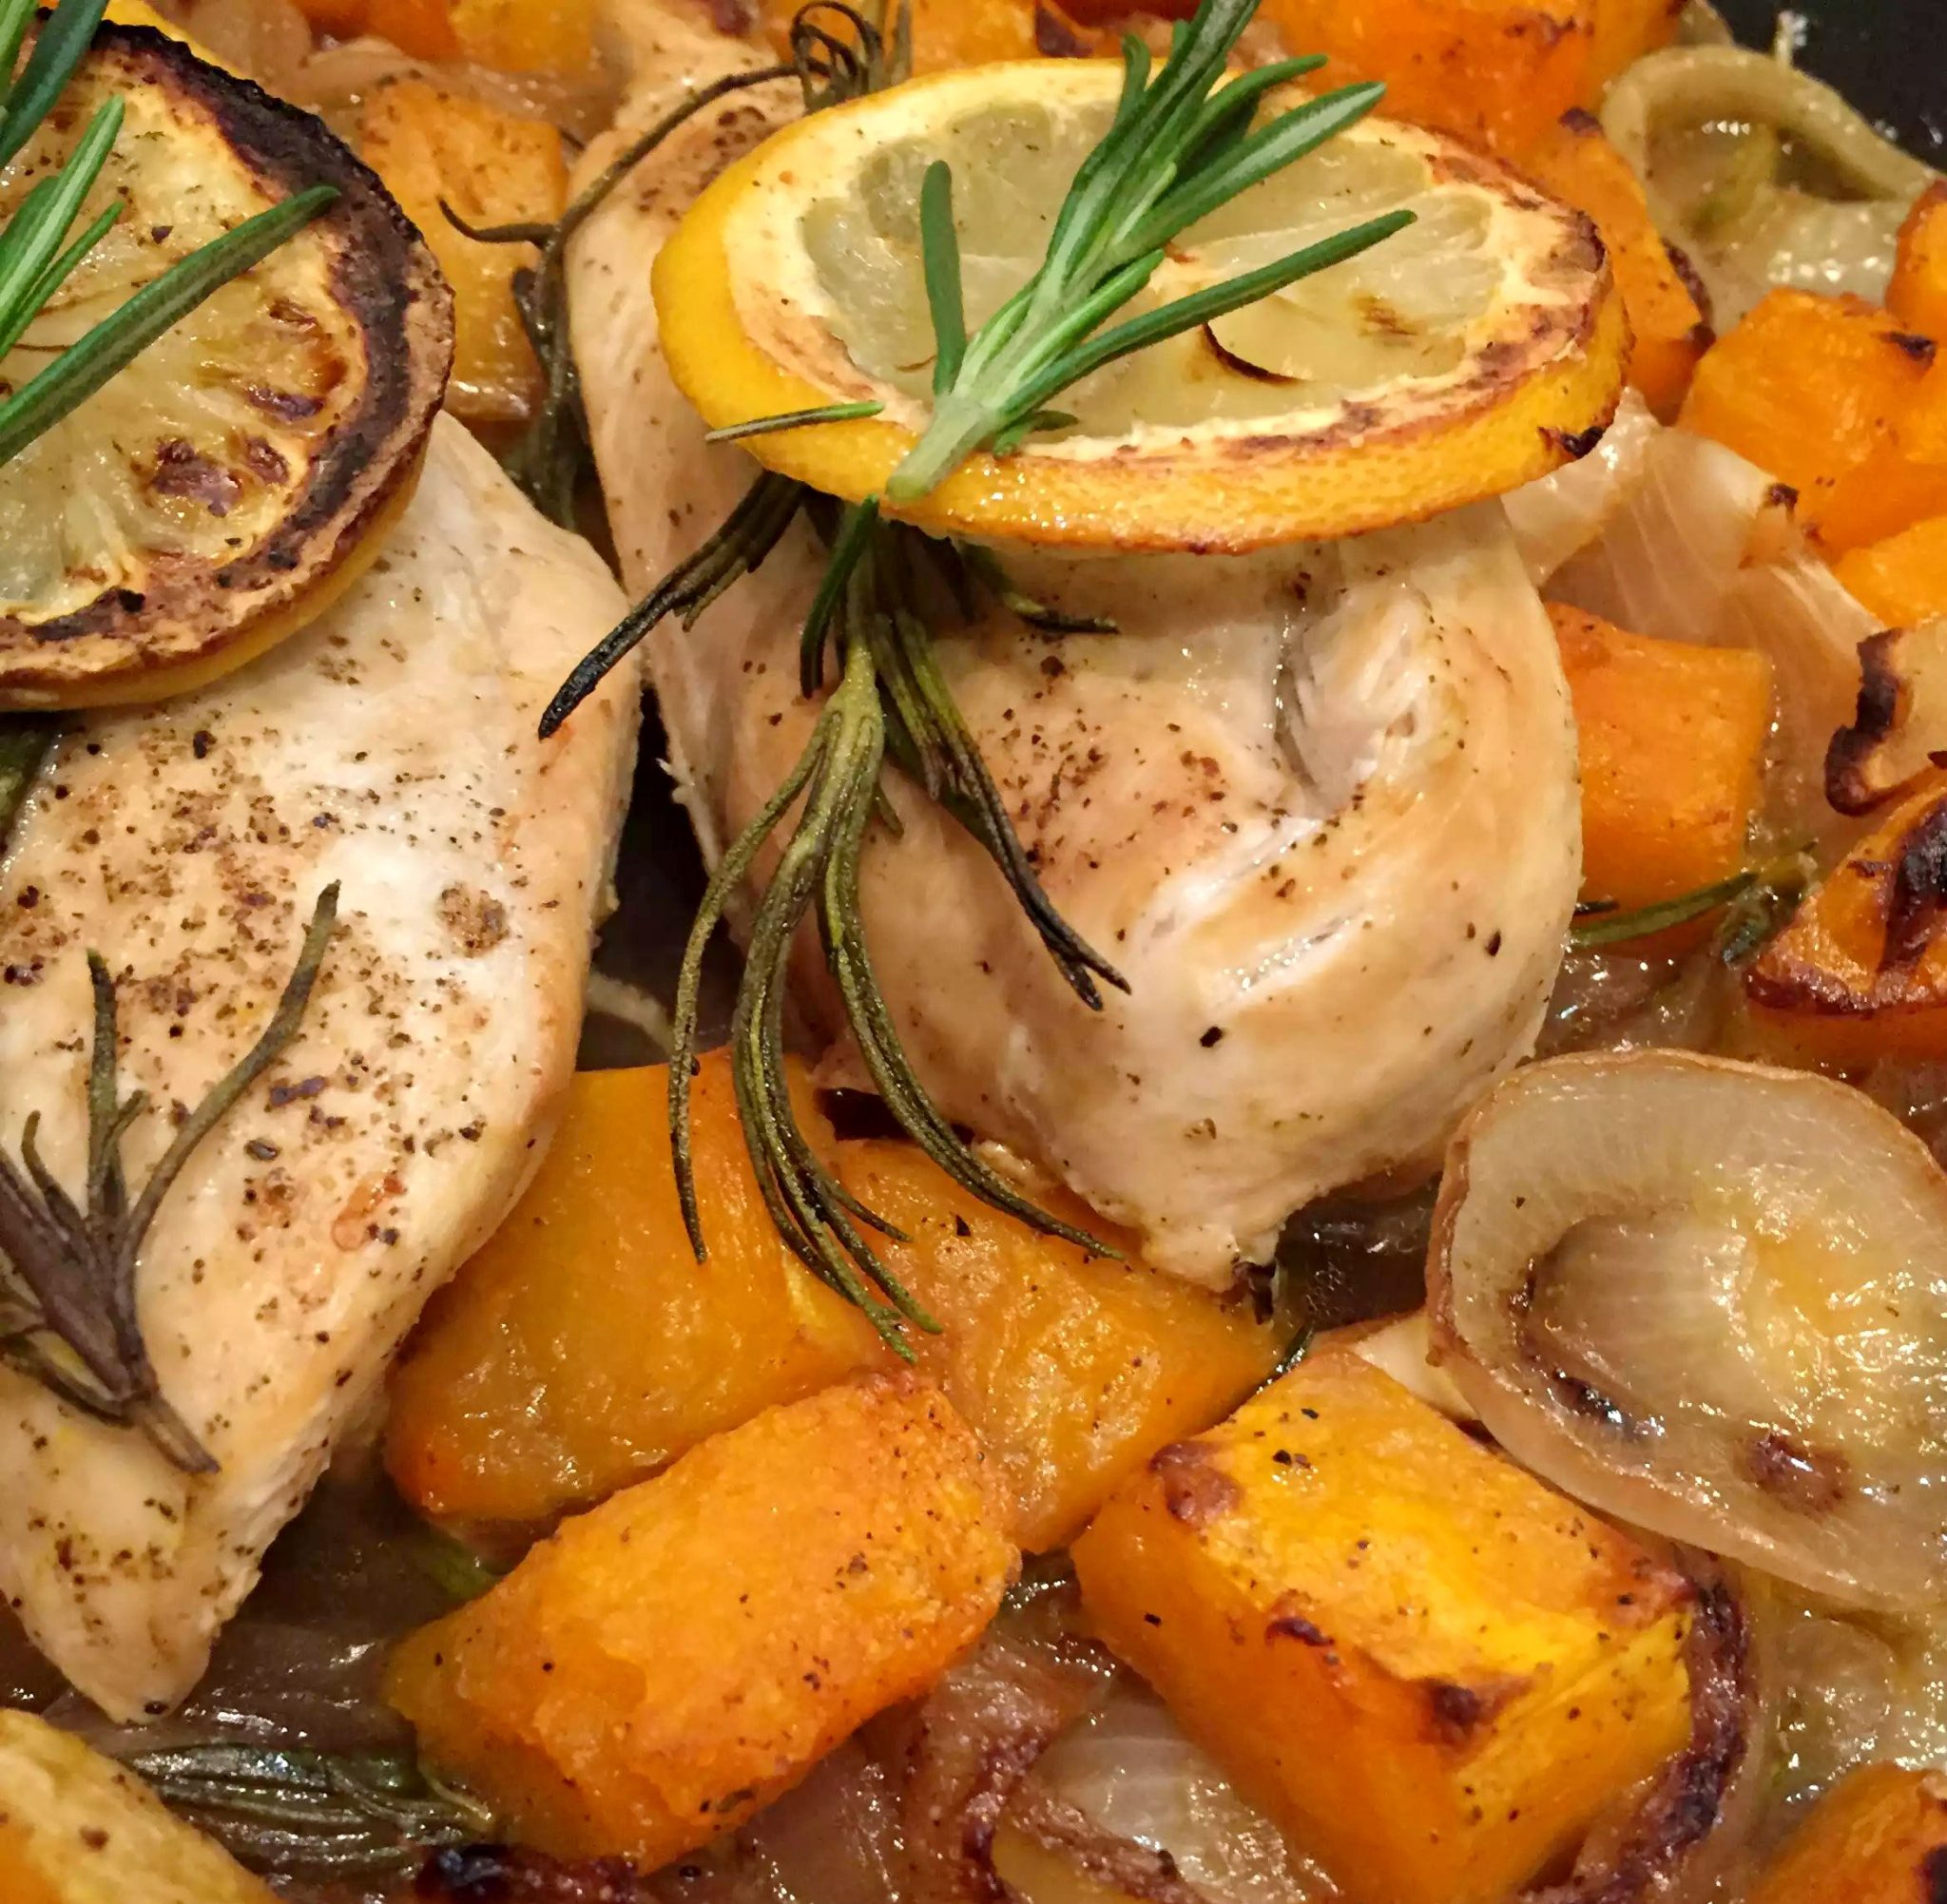 Roasted Chicken with a Lemon, Rosemary & White Wine Sauce by Emma Eats & Explores - SCD, Paleo, Grainfree, Glutenfree, Dairyfree, Sugarfree, Clean Eating